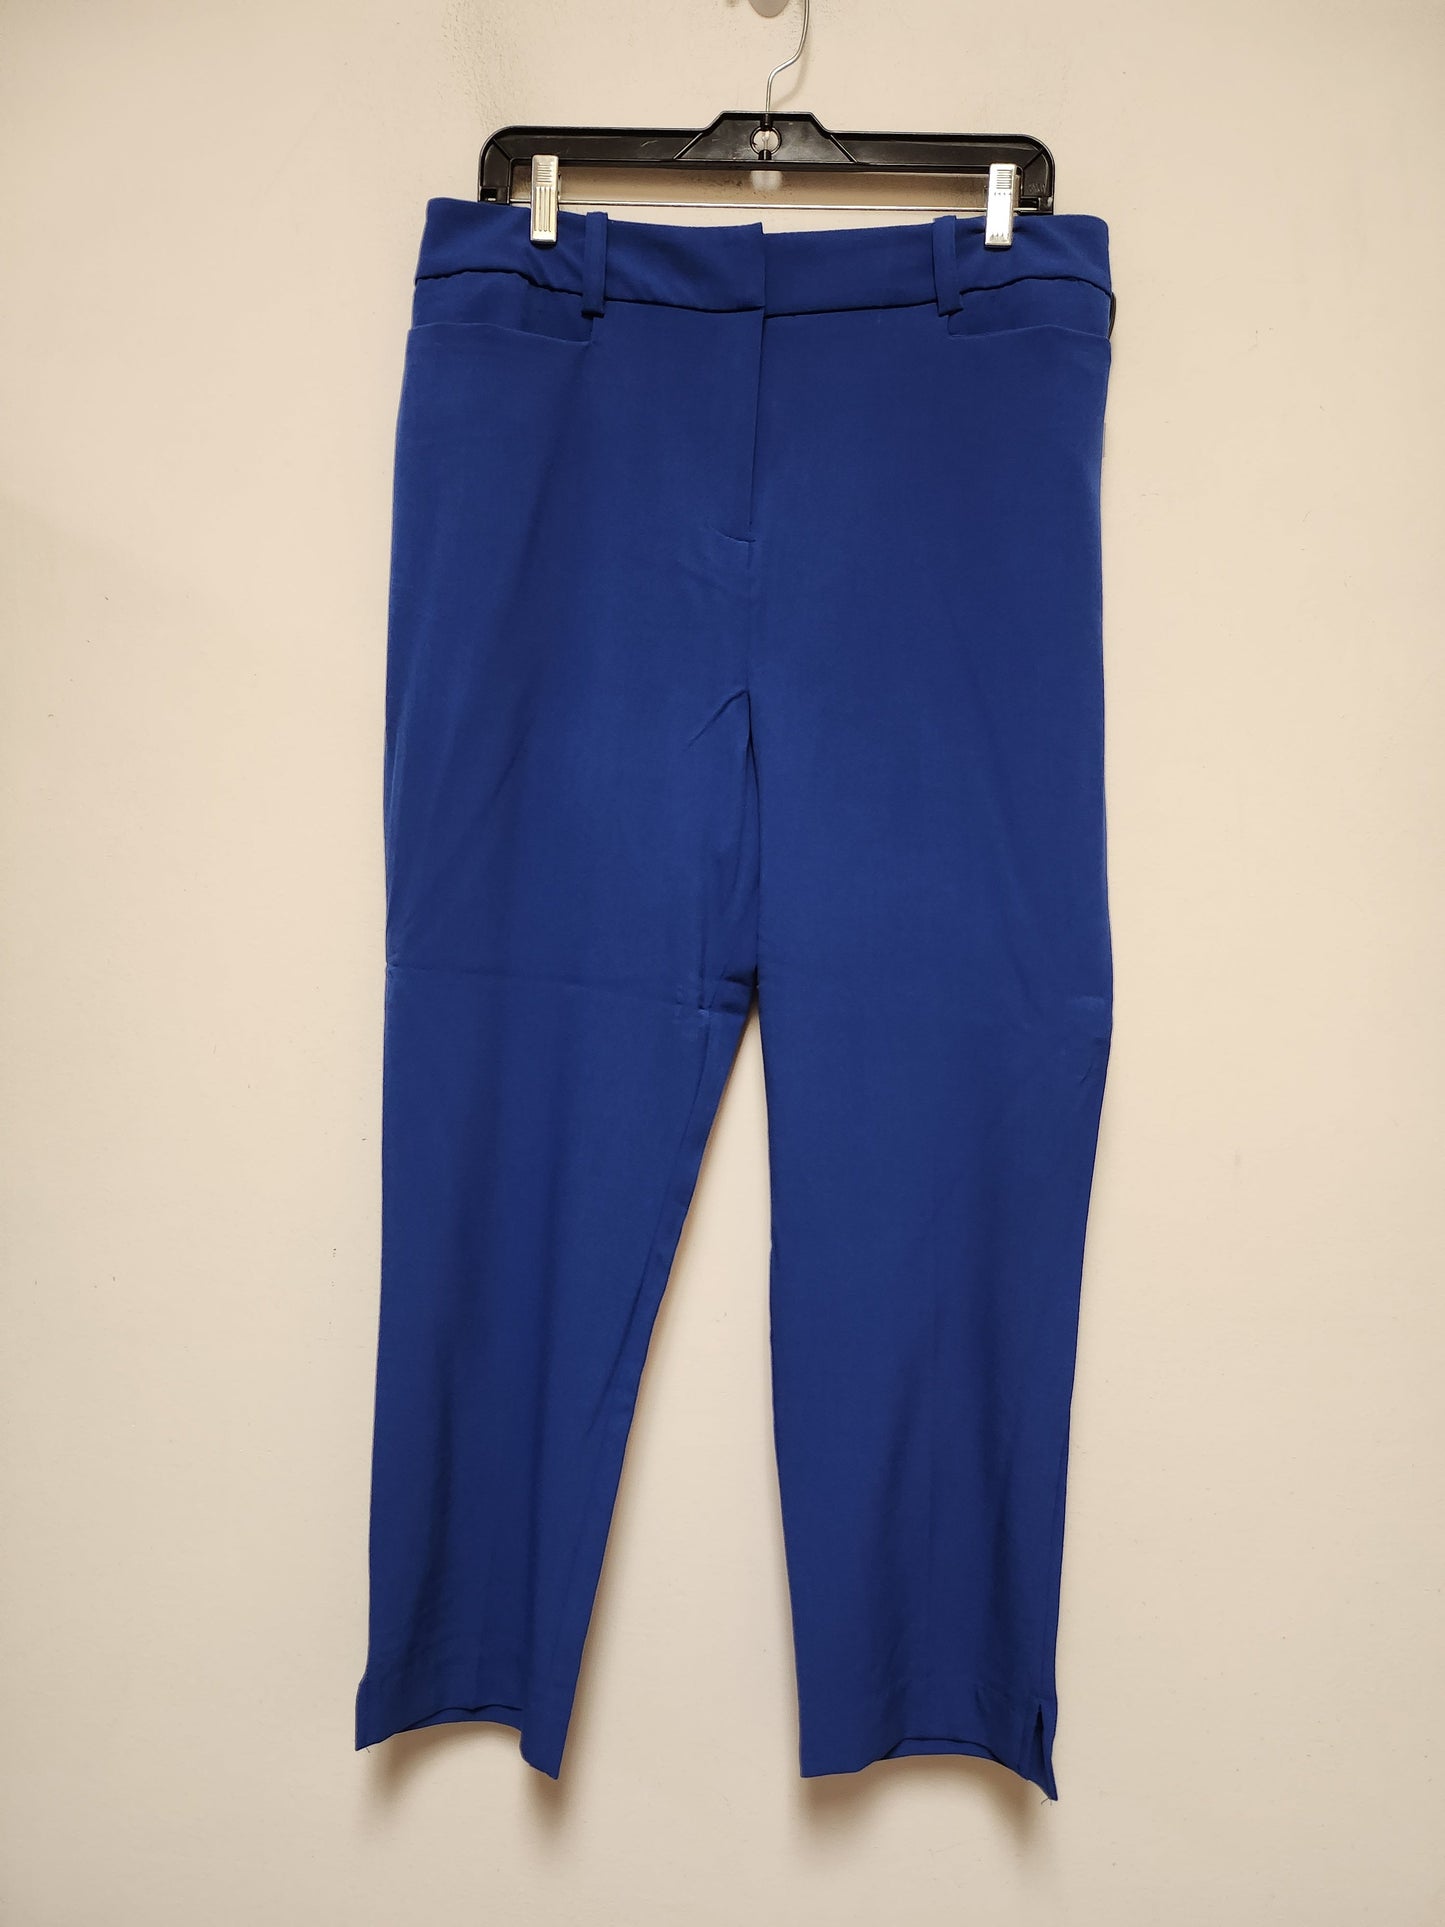 Blue Pants Other New York And Co, Size 14